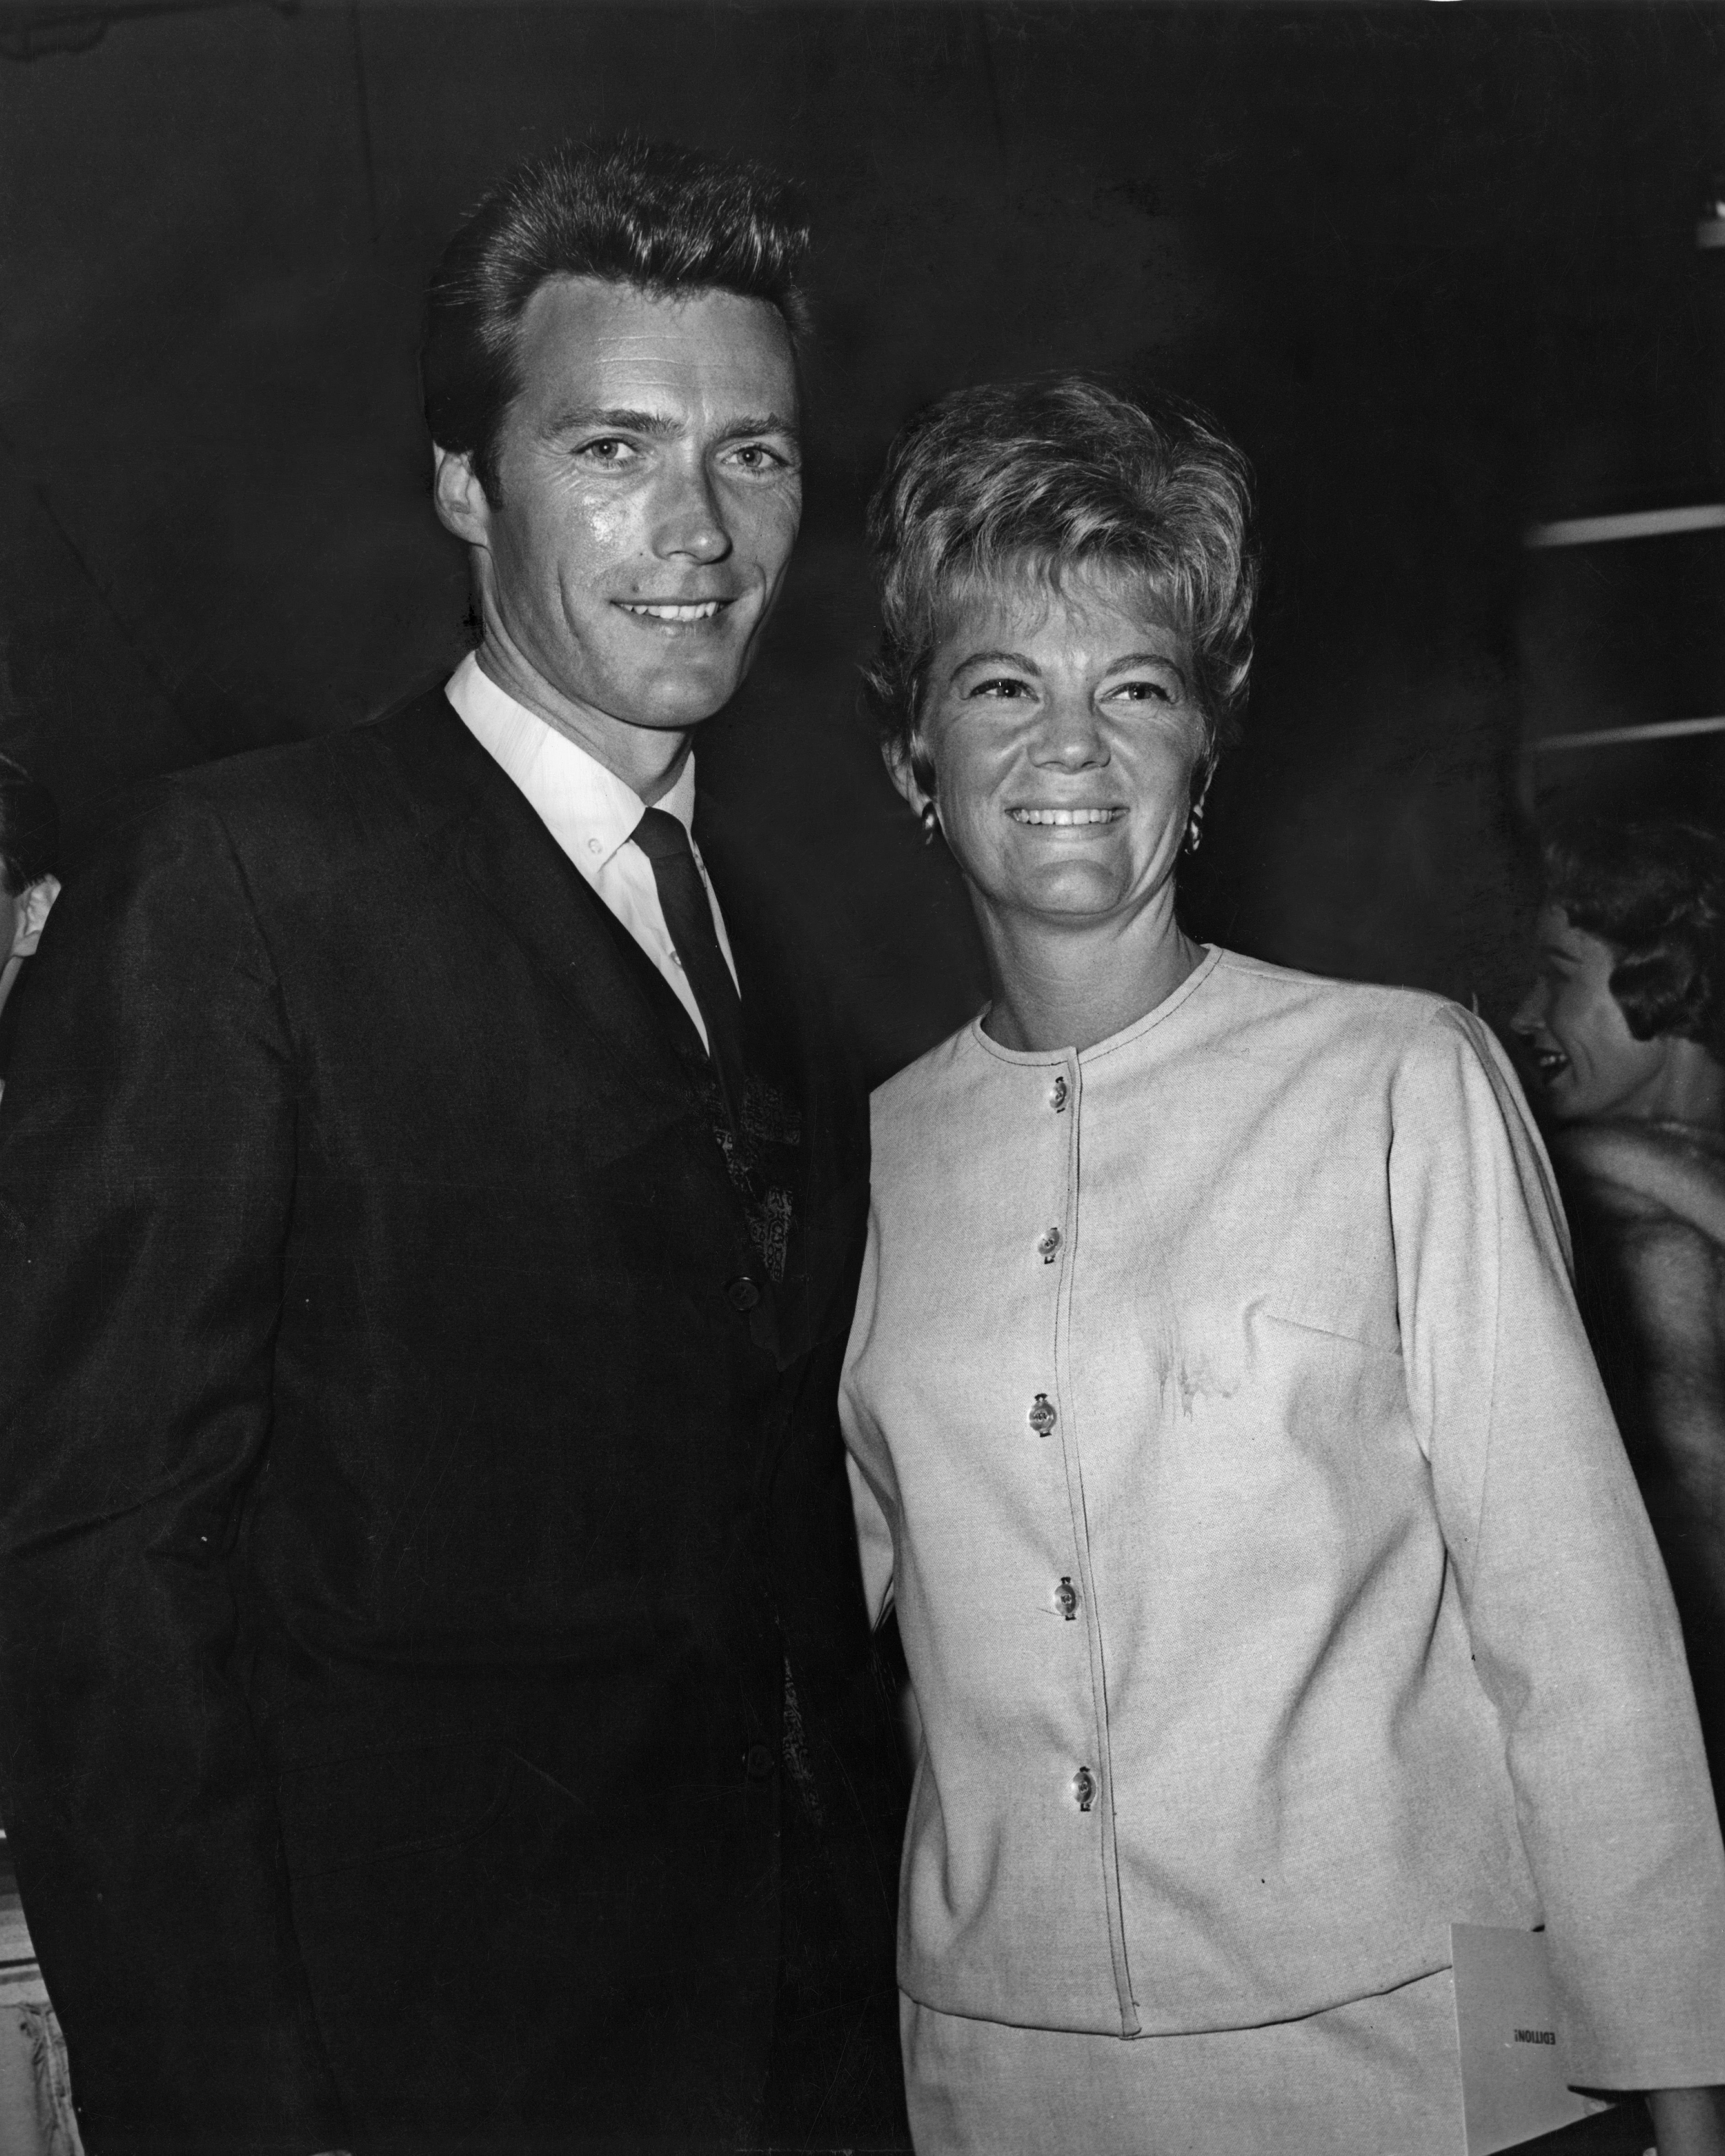 Clint Eastwood with Maggie Johnson at the opening night of an 'Ice Capades' skating show in 1960 | Photo: Joe Shere/Archive Photos/Getty Images